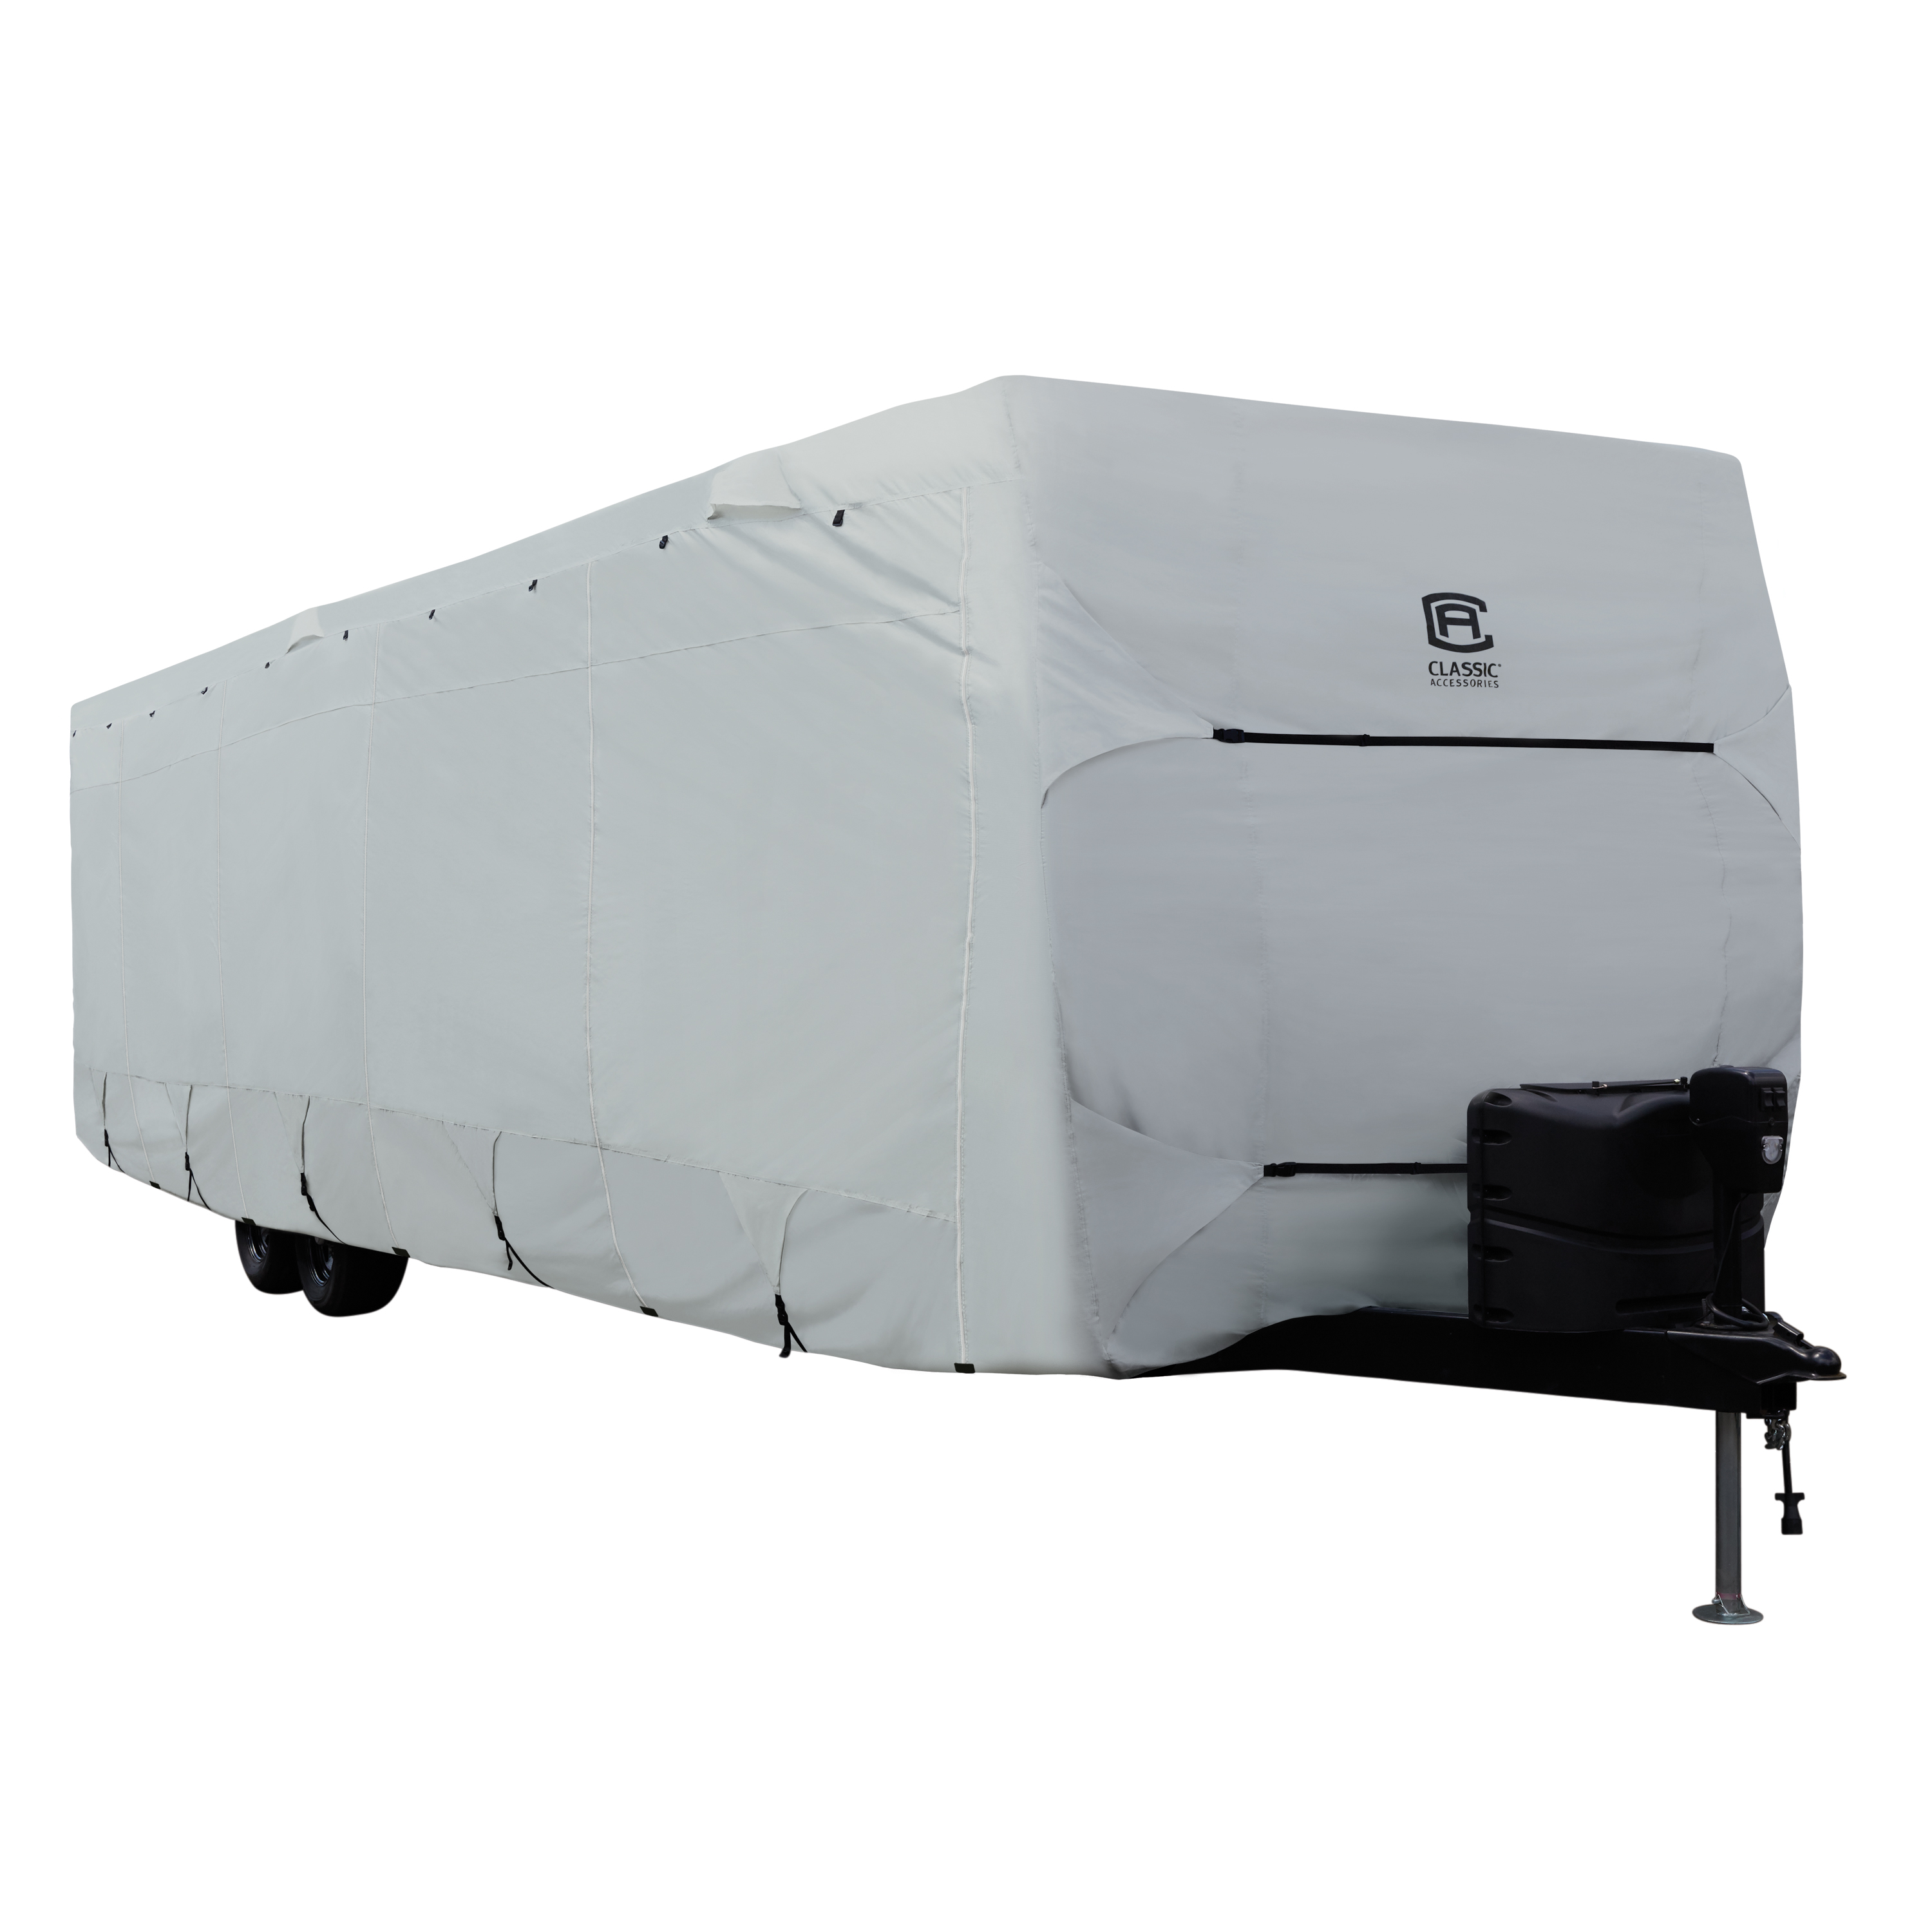 Classic Accessories Over Drive PermaPRO™ Travel Trailer Cover, Fits 27' - 30' RVs - image 1 of 19